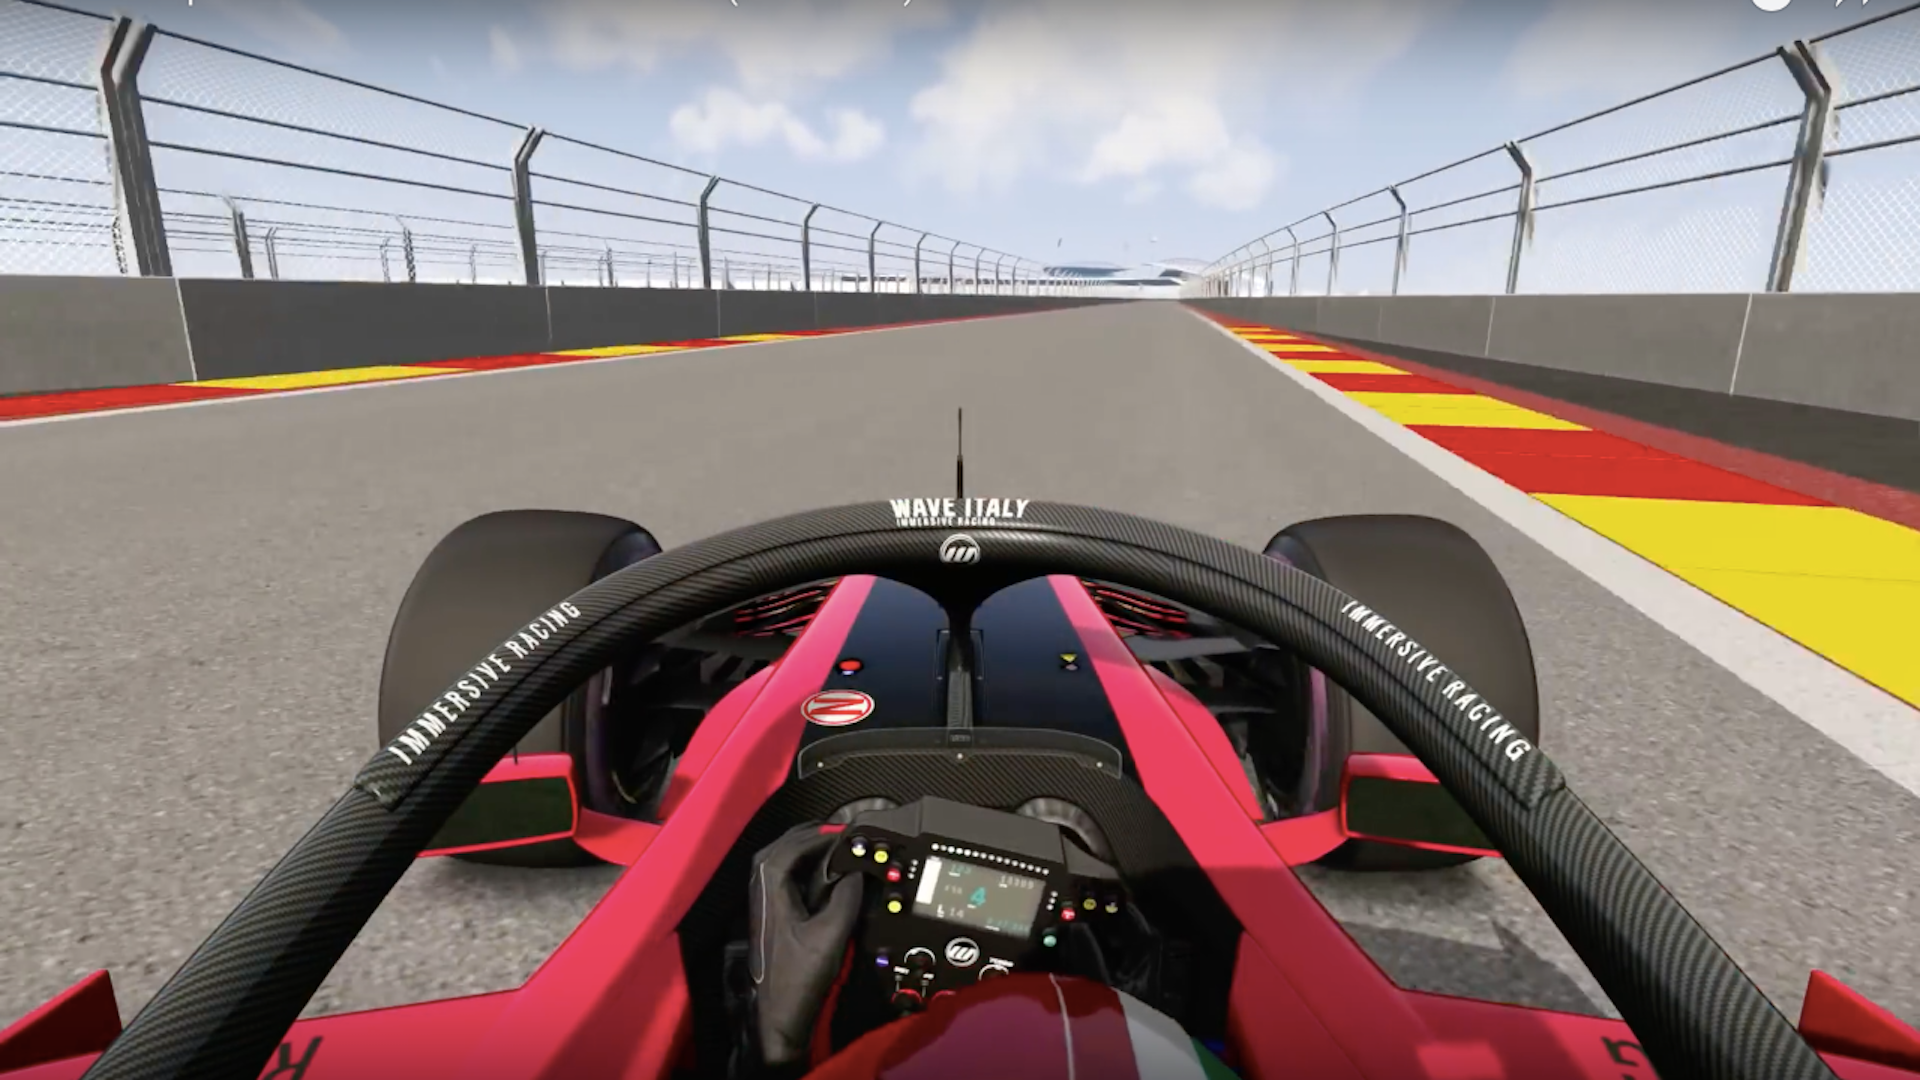 Someone Already Made a Virtual Copy of Vietnam’s F1 Circuit on Assetto Corsa